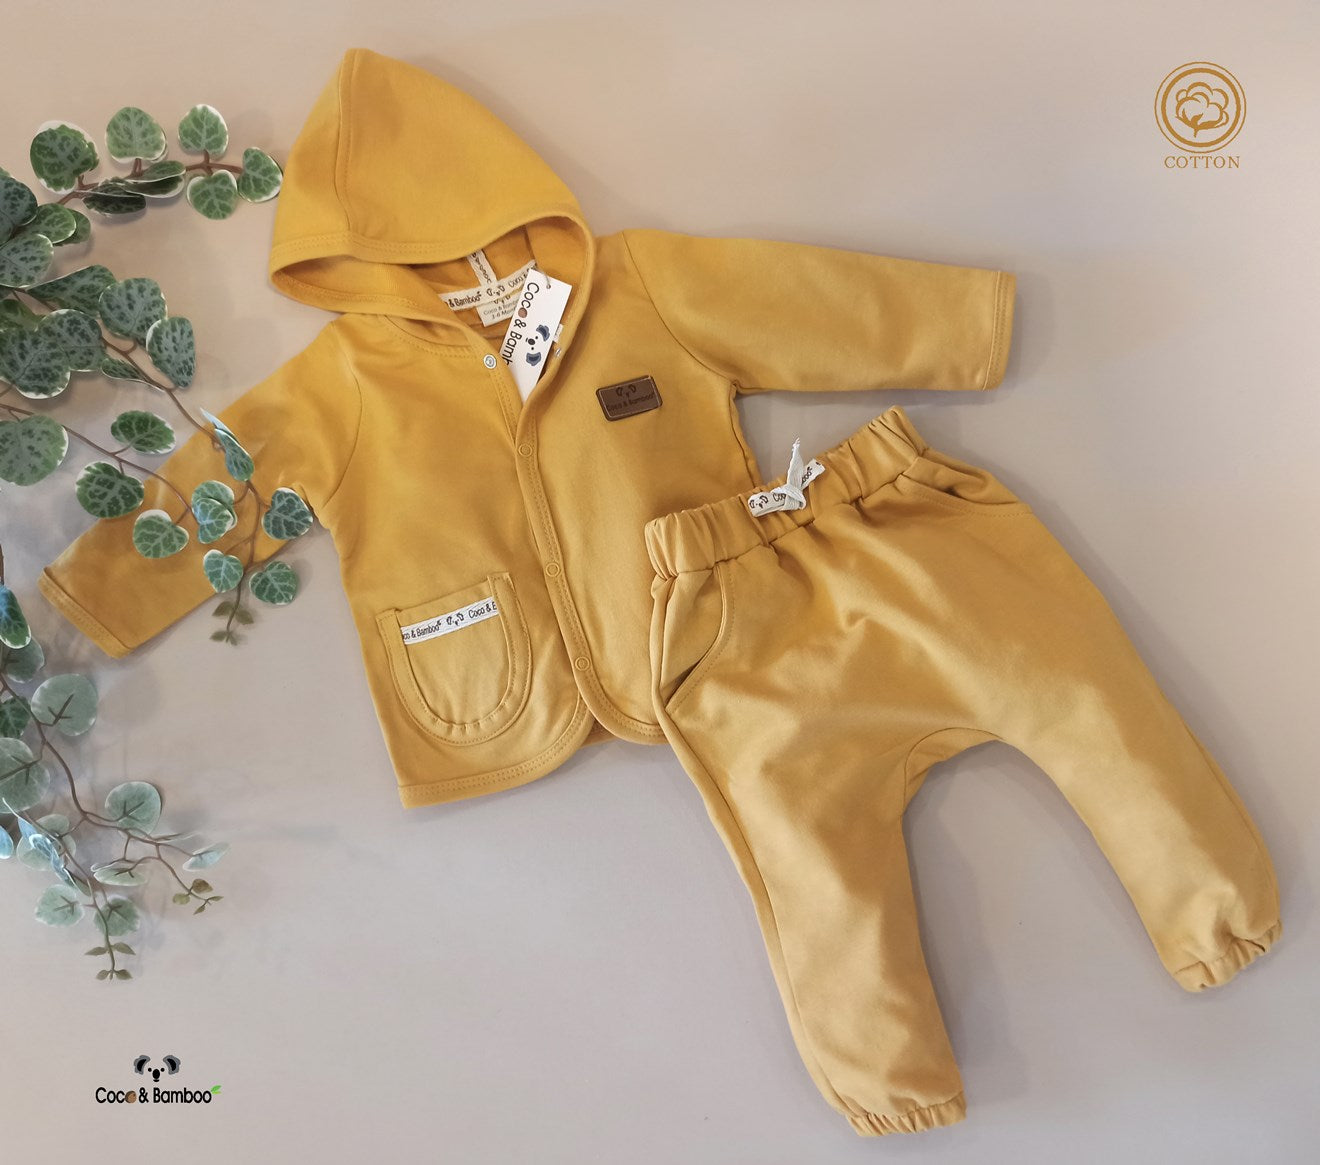 Hooded long sleeve Baby Set made of 100% Cotton.  includes jacket and pants.